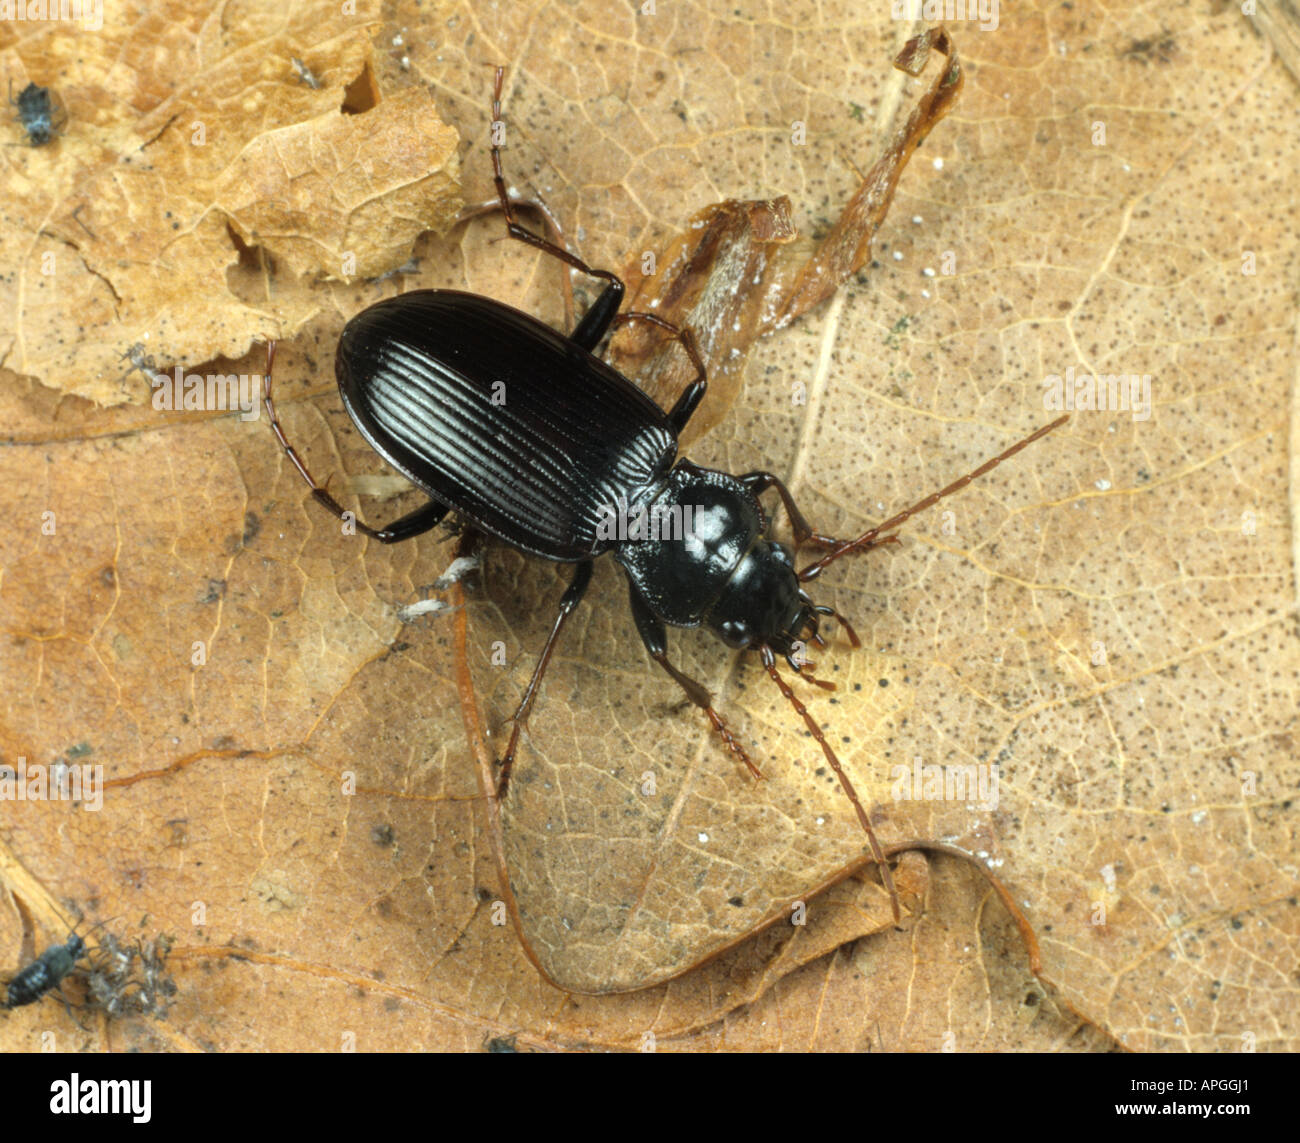 A ground beetle Nebria brevicollis a natural predator of pests and other small animals Stock Photo